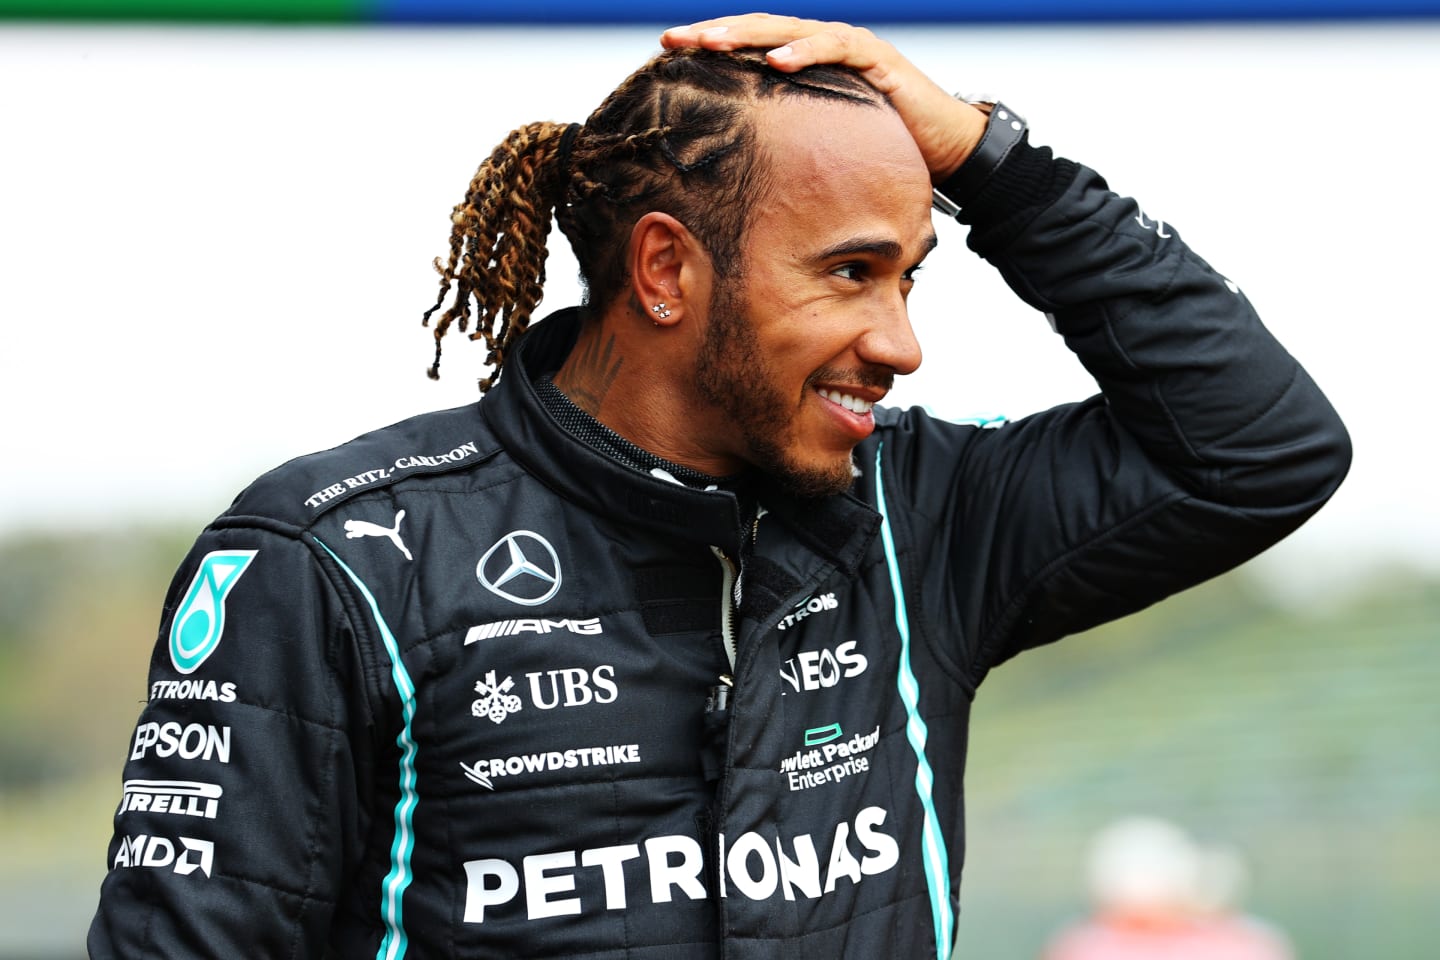 IMOLA, ITALY - APRIL 17: Pole position qualifier Lewis Hamilton of Great Britain and Mercedes GP looks on in parc ferme during qualifying ahead of the F1 Grand Prix of Emilia Romagna at Autodromo Enzo e Dino Ferrari on April 17, 2021 in Imola, Italy. (Photo by Bryn Lennon/Getty Images)